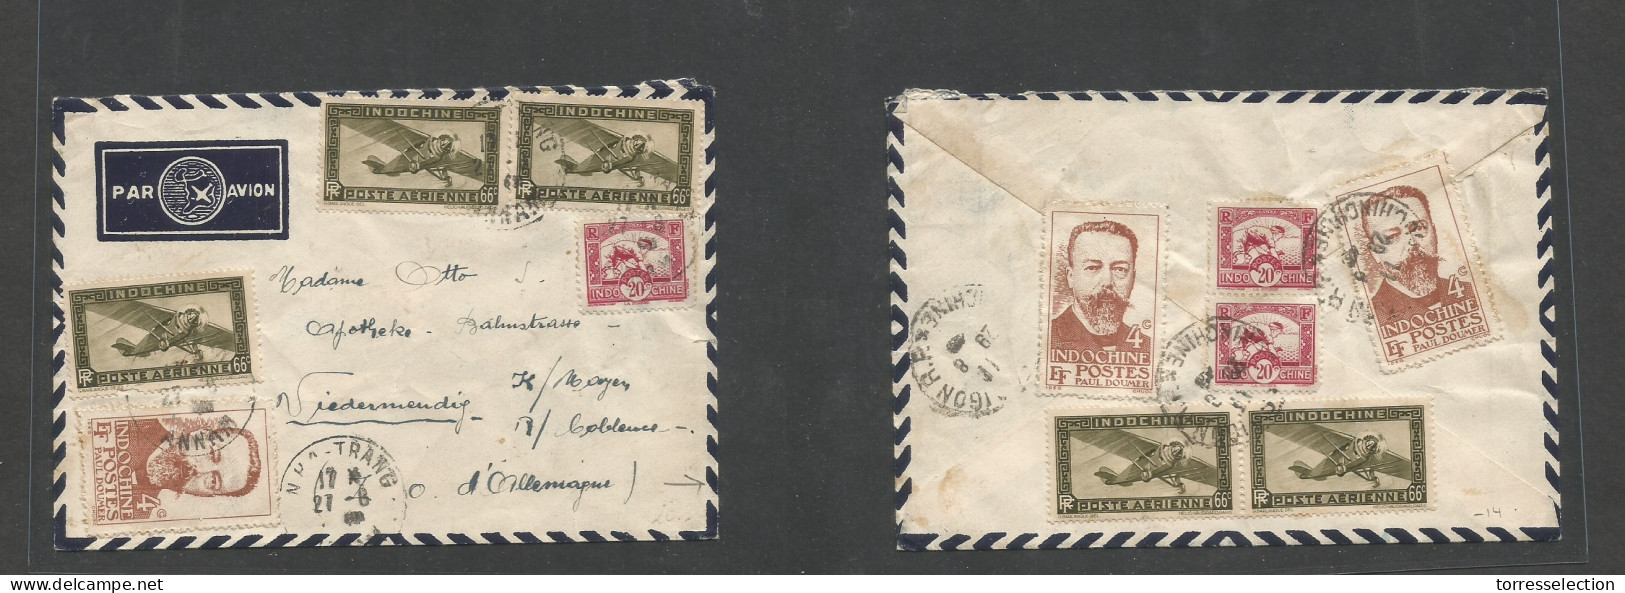 INDOCHINA. C. 1932. Nha Trang - Germany, Viedermendig. Air Multifkd Front And Reverse. Fine Used. SALE. - Autres - Asie